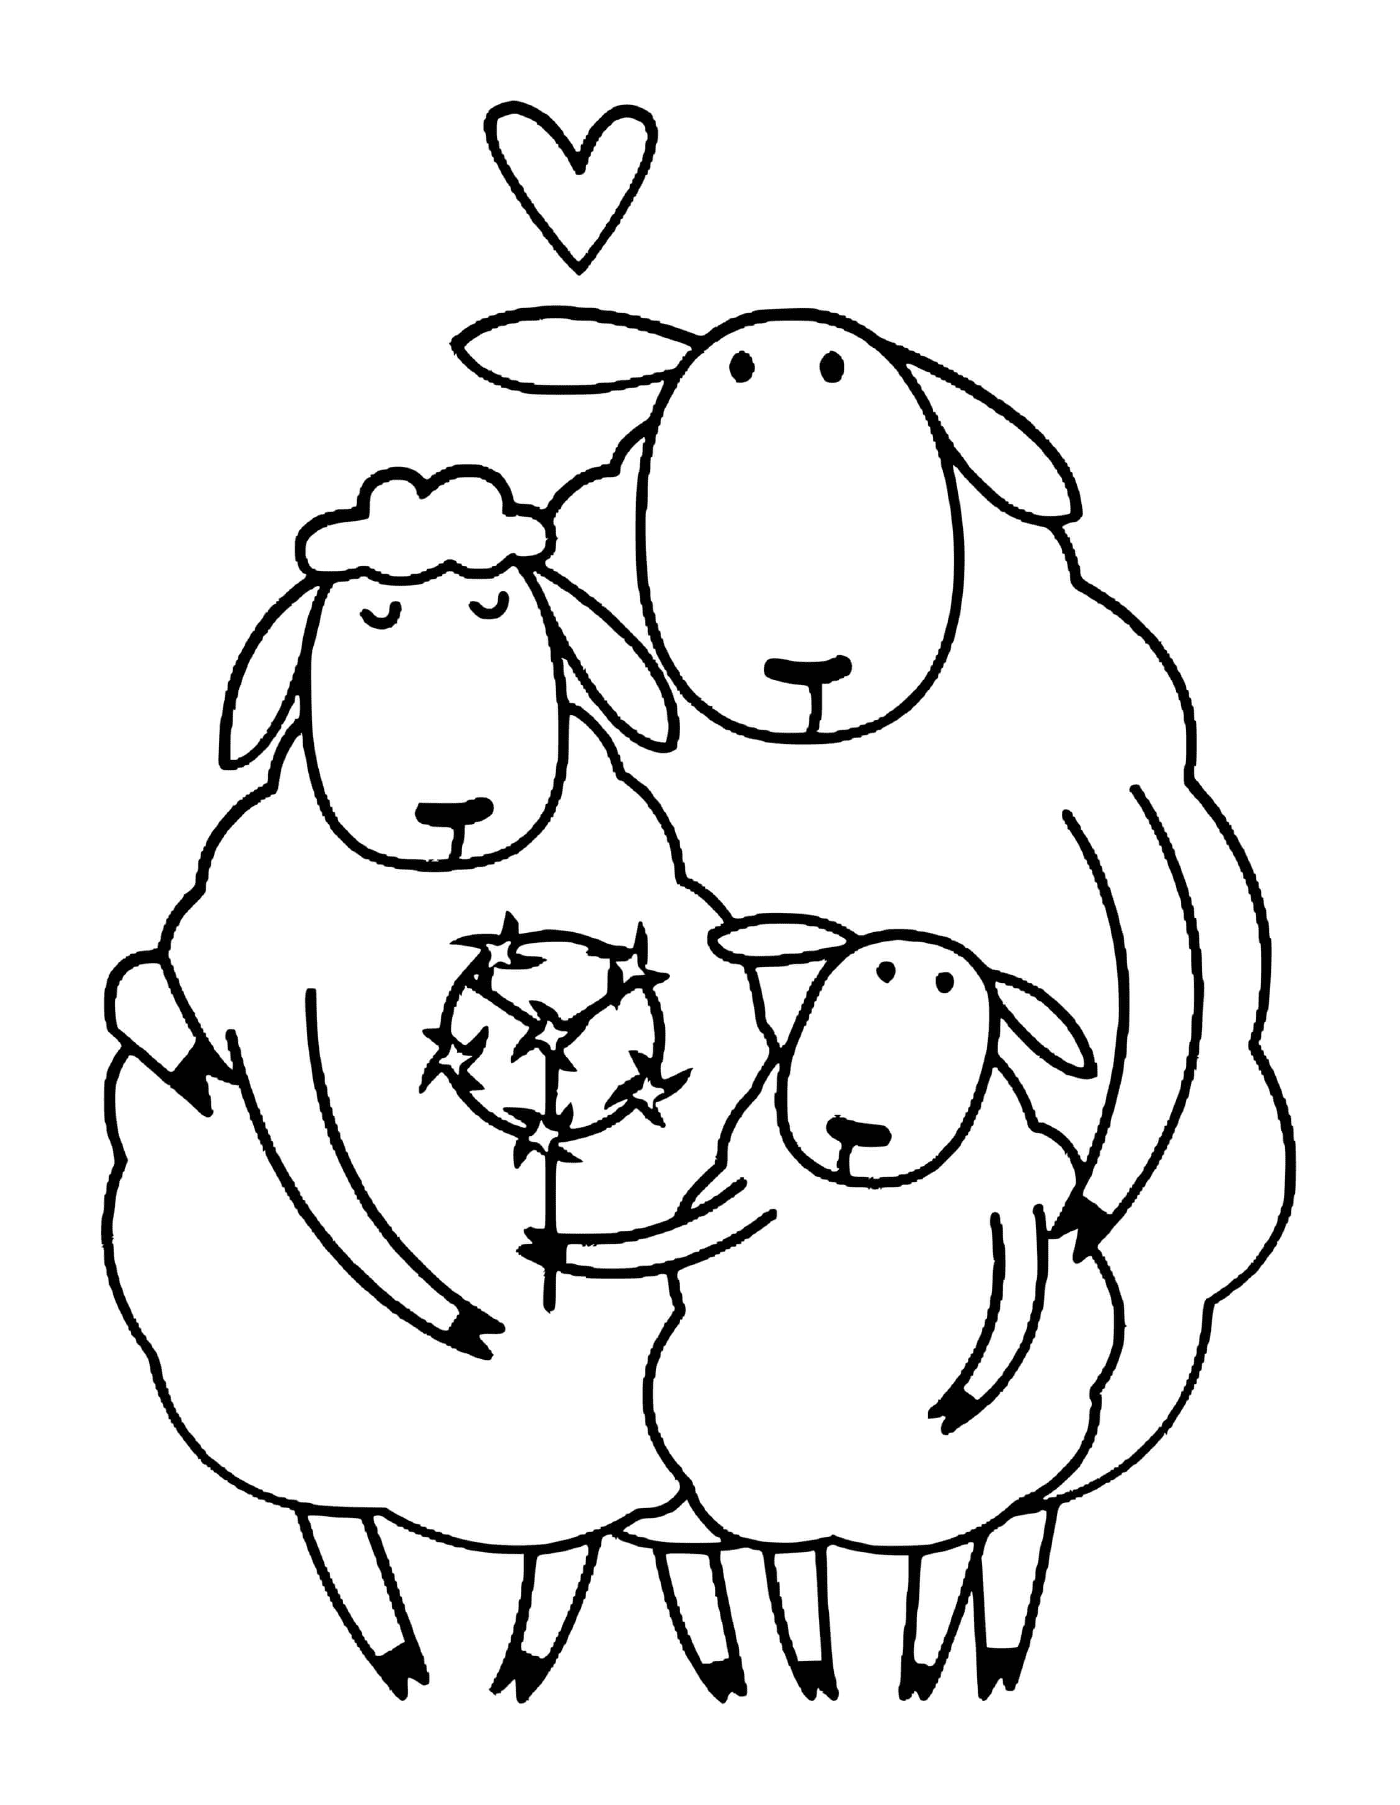  One sheep and two lambs 